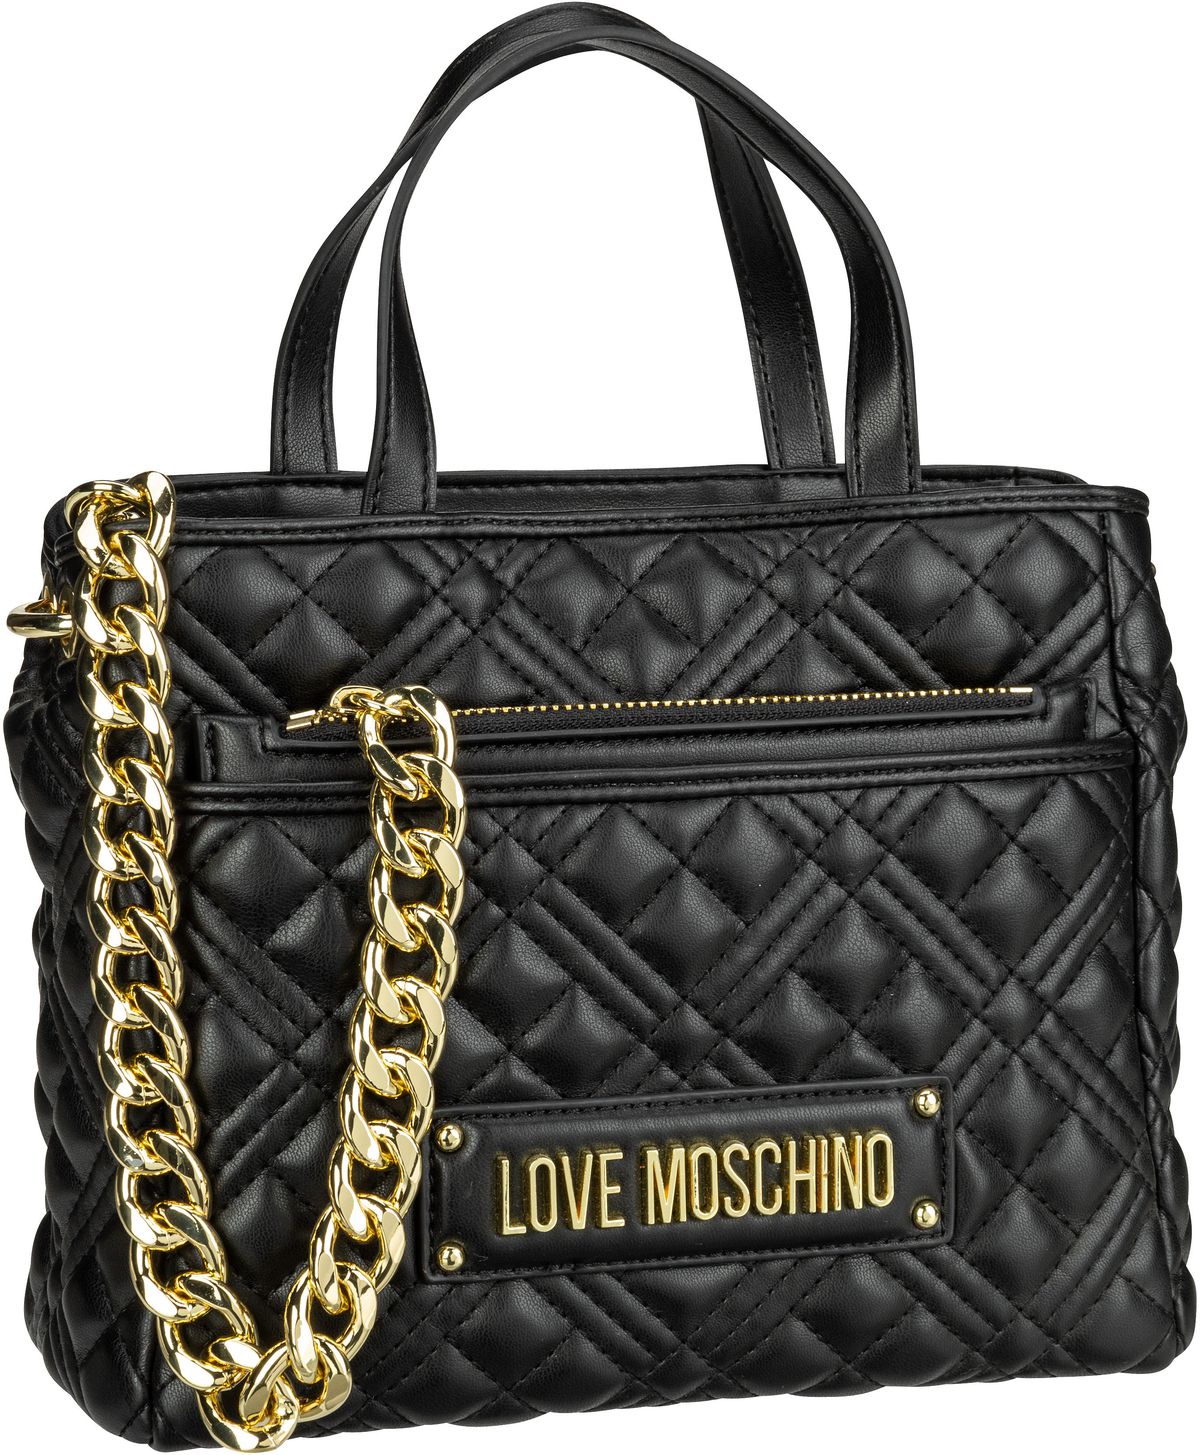 Love Moschino Quilted Bag Pocket 4020 - Black